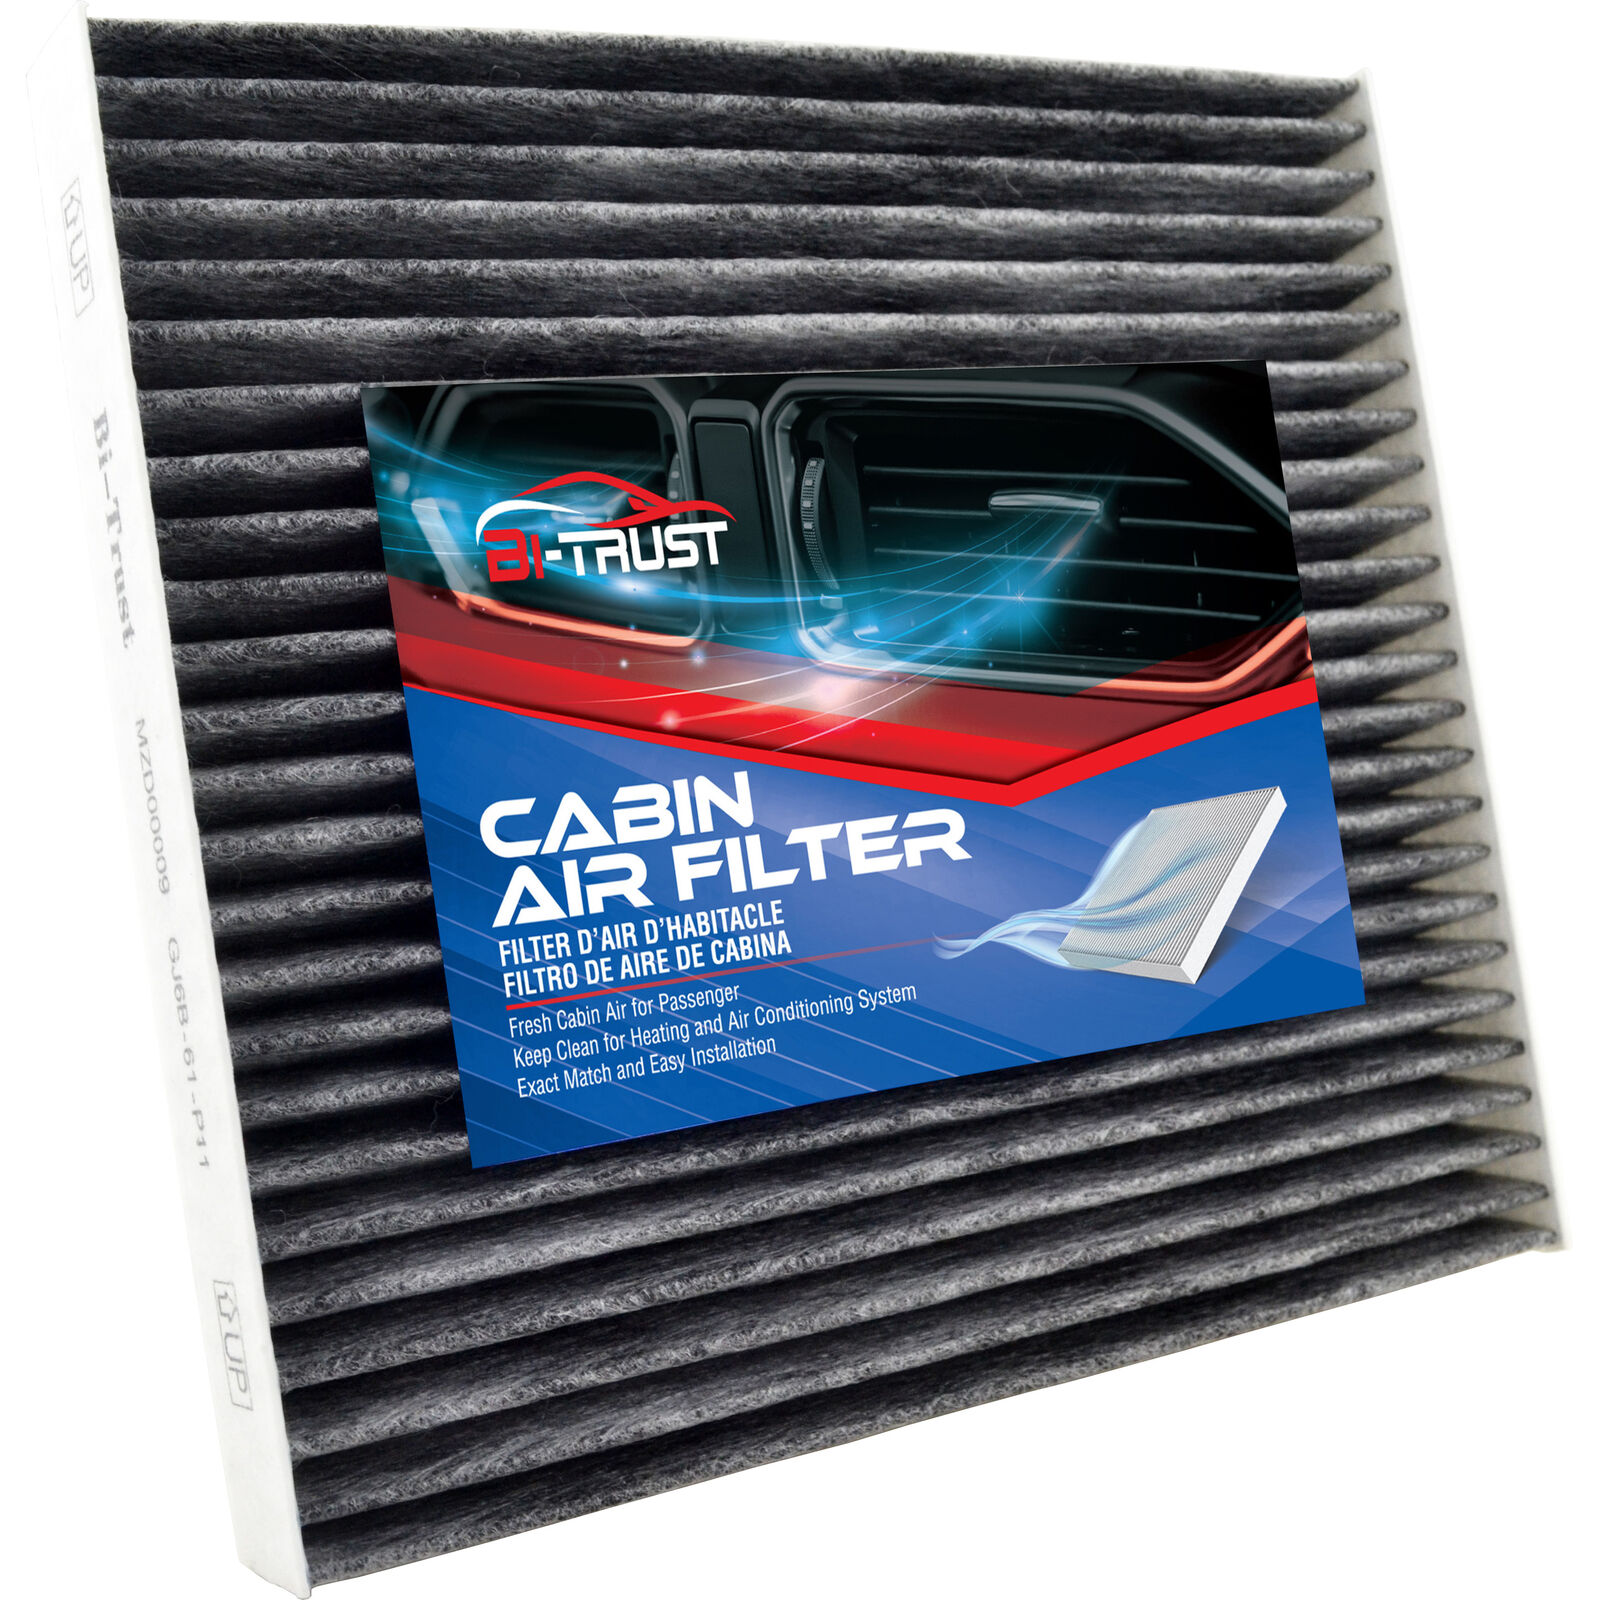 Cabin Air Filter for Jeep Wagoneer Mazda Cx-7 Ram 1500 2500 3500 4500 5500